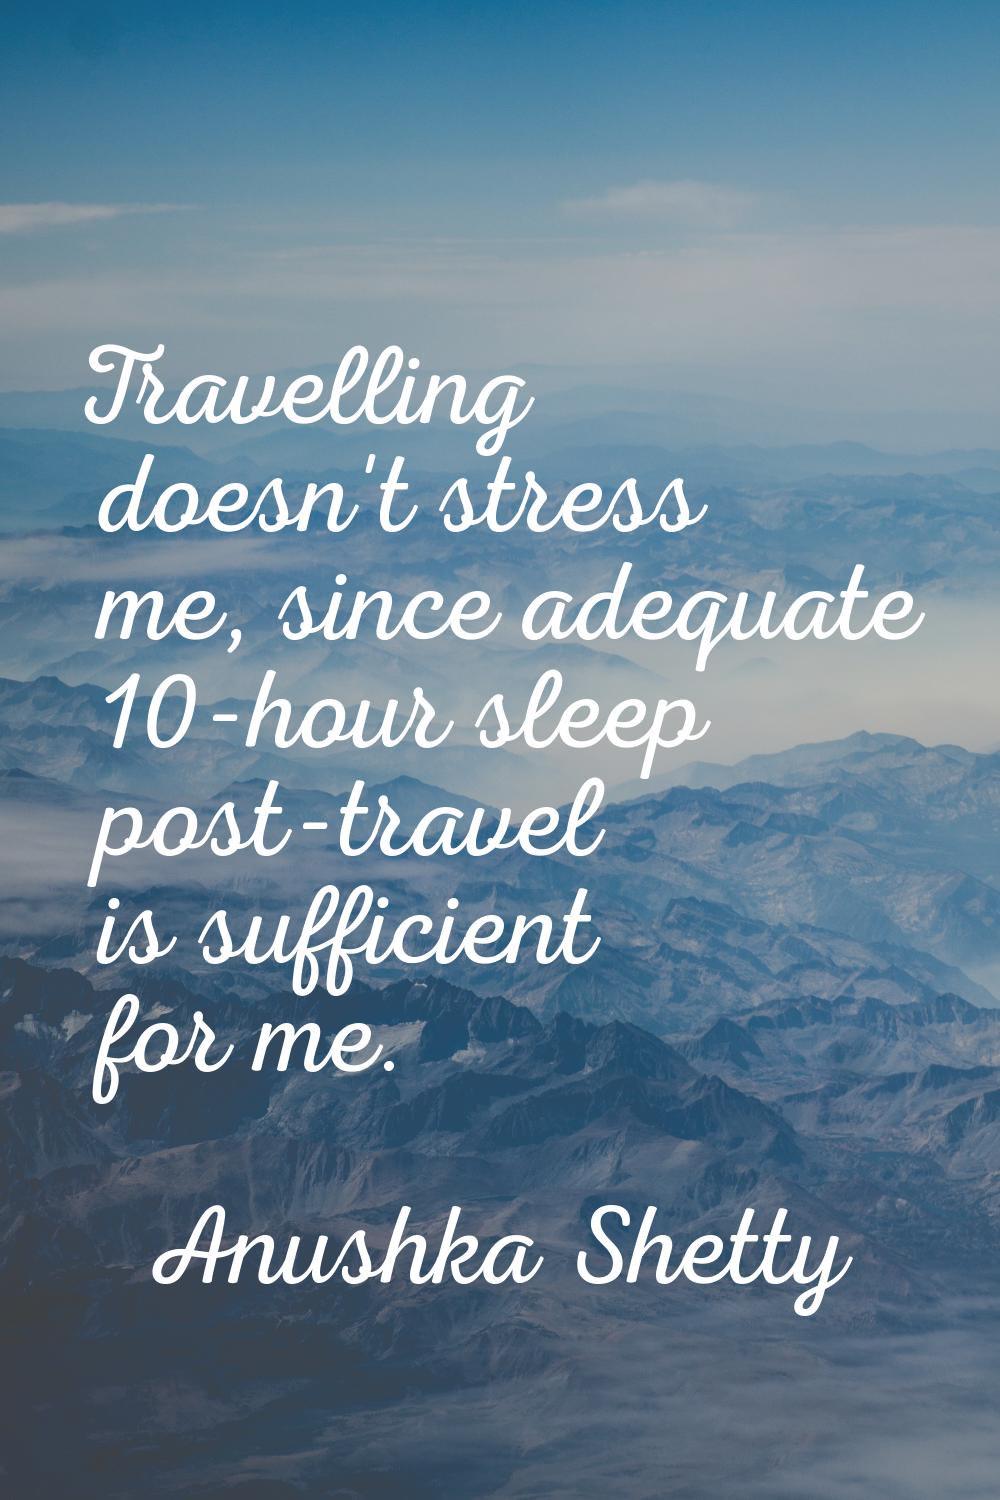 Travelling doesn't stress me, since adequate 10-hour sleep post-travel is sufficient for me.